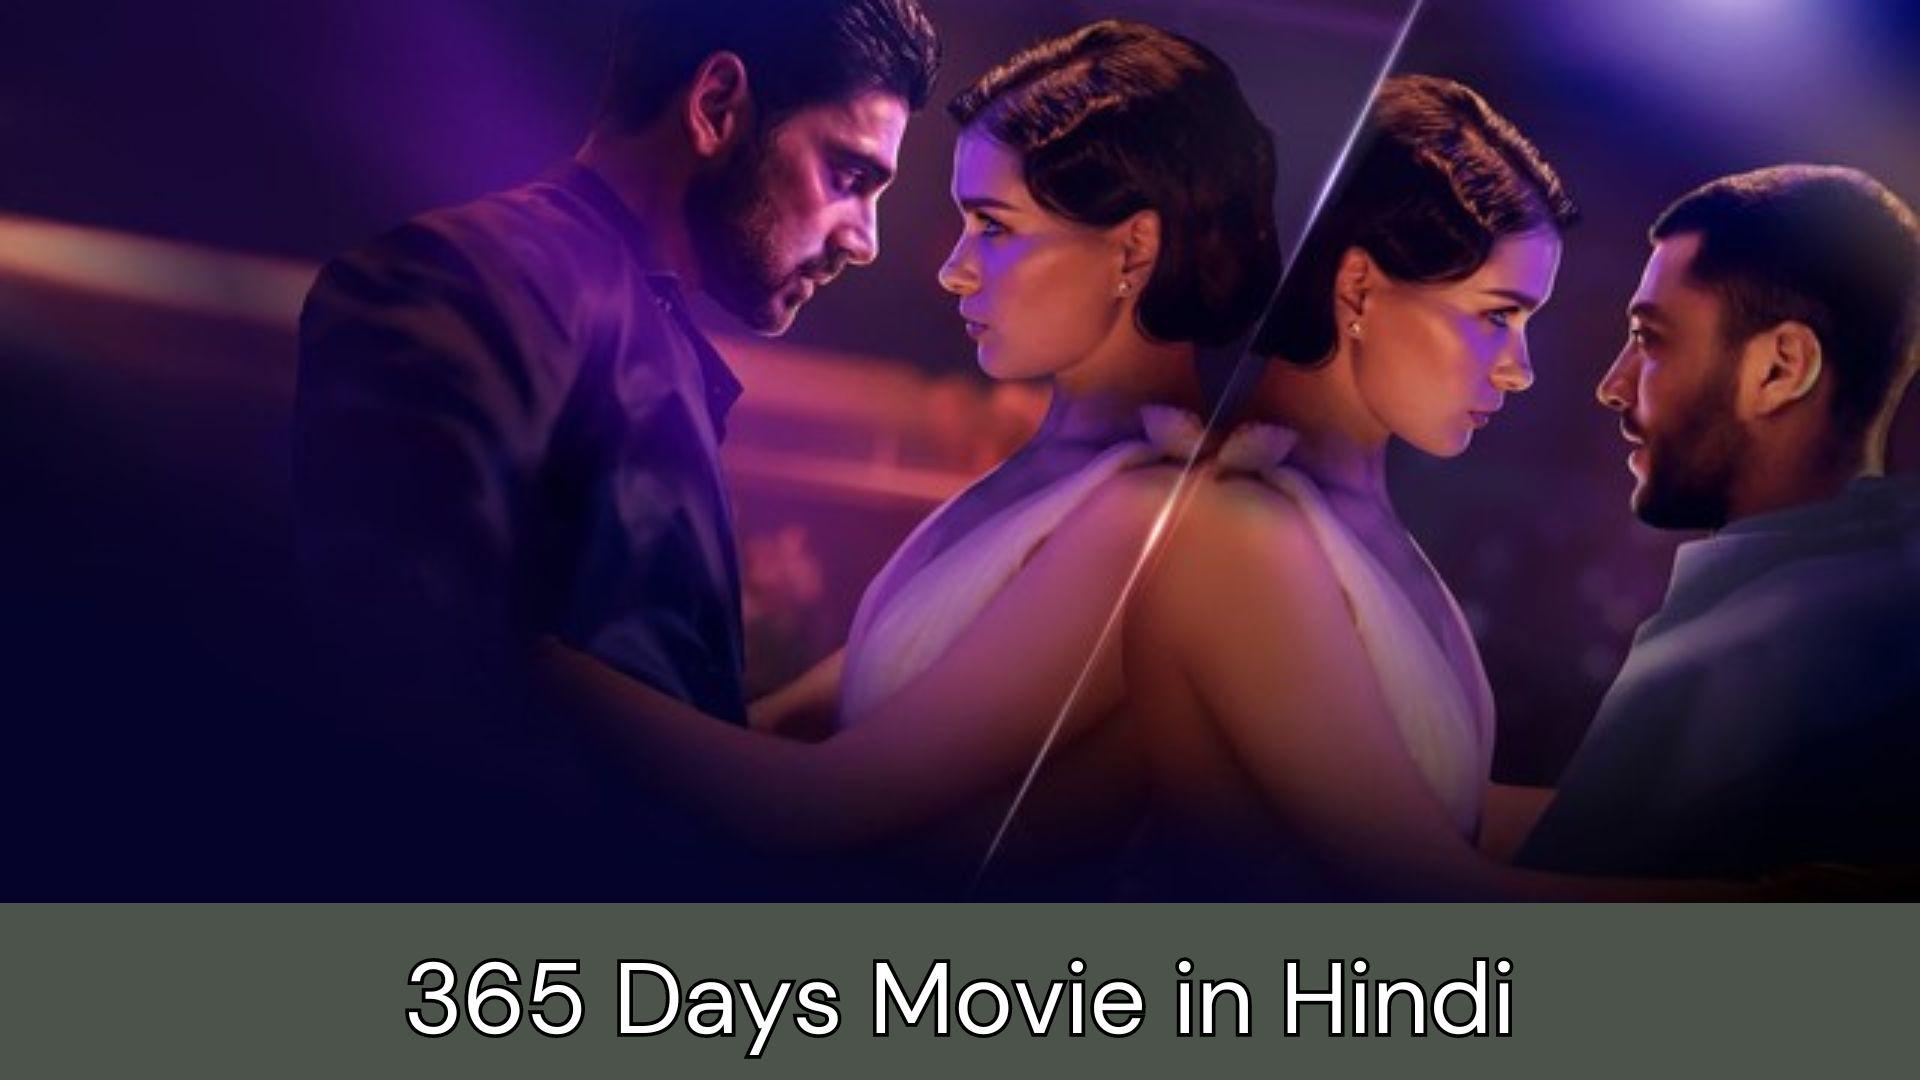 365 Days Movie Release Date, Netflix, Order, Full Story, Cast